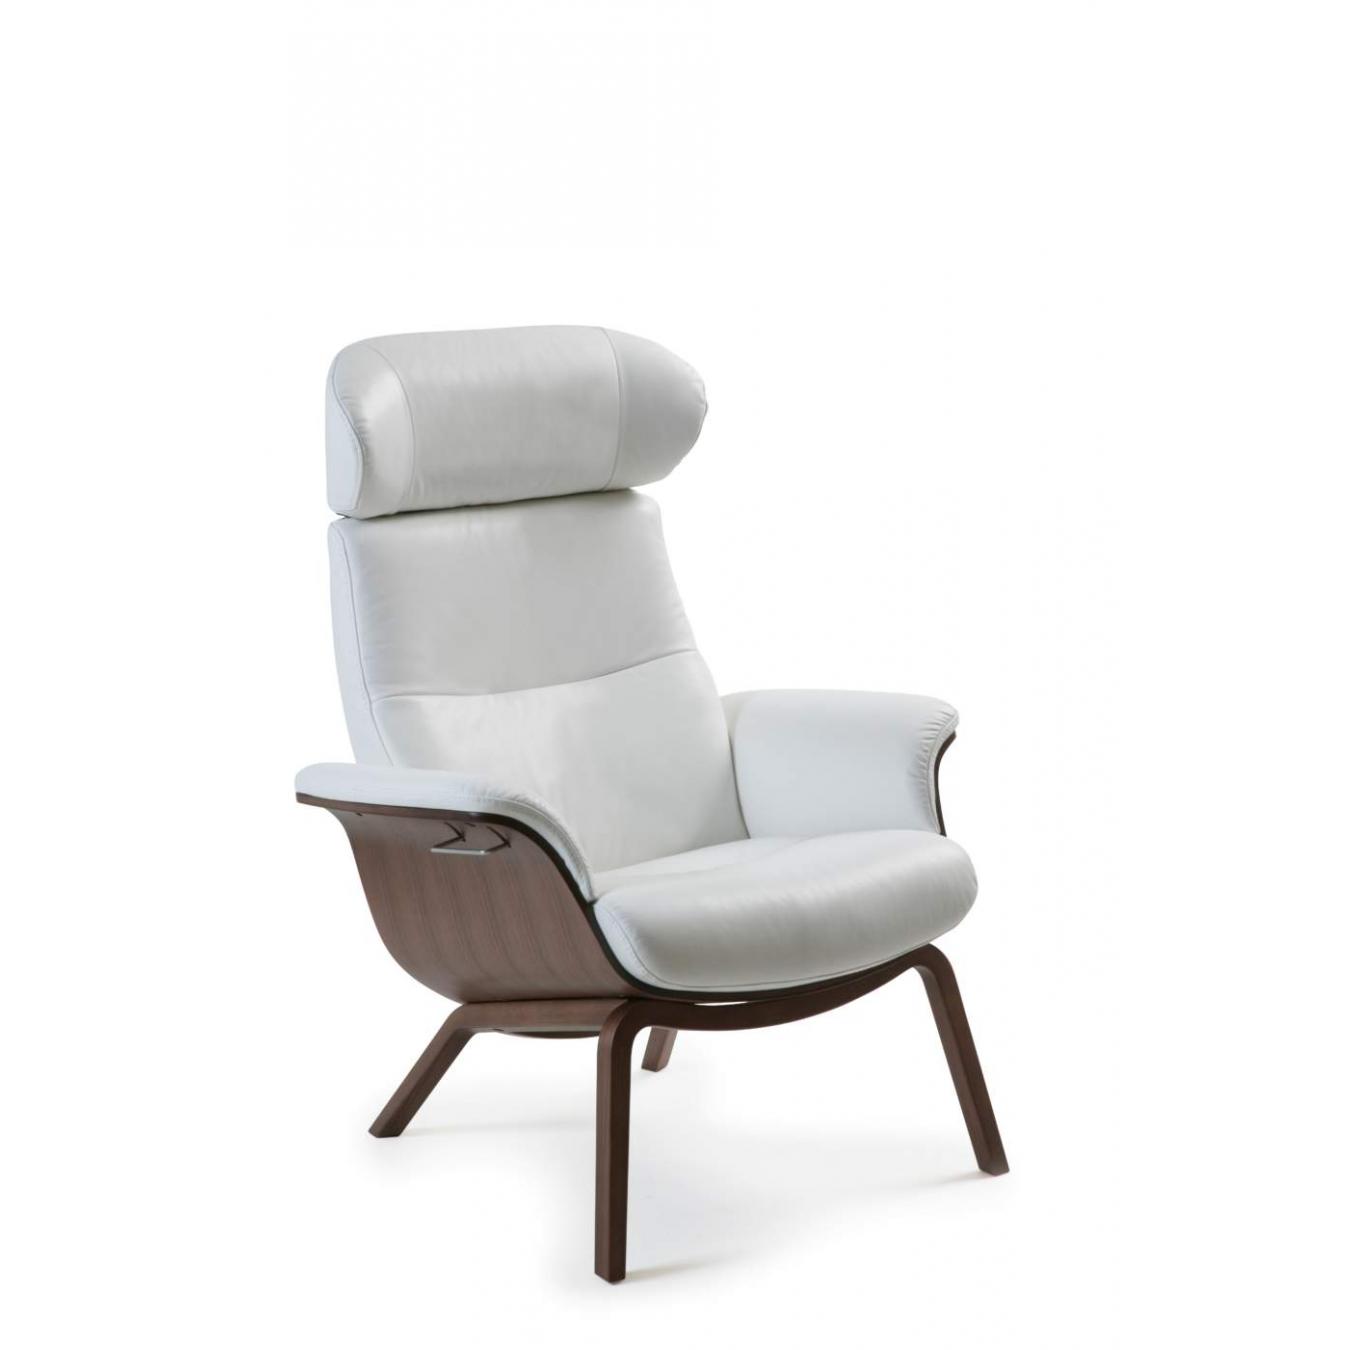 Conform-Timeout-design-relax-chair-with-fixed-base-design-relax-fotel-fix-vazzal